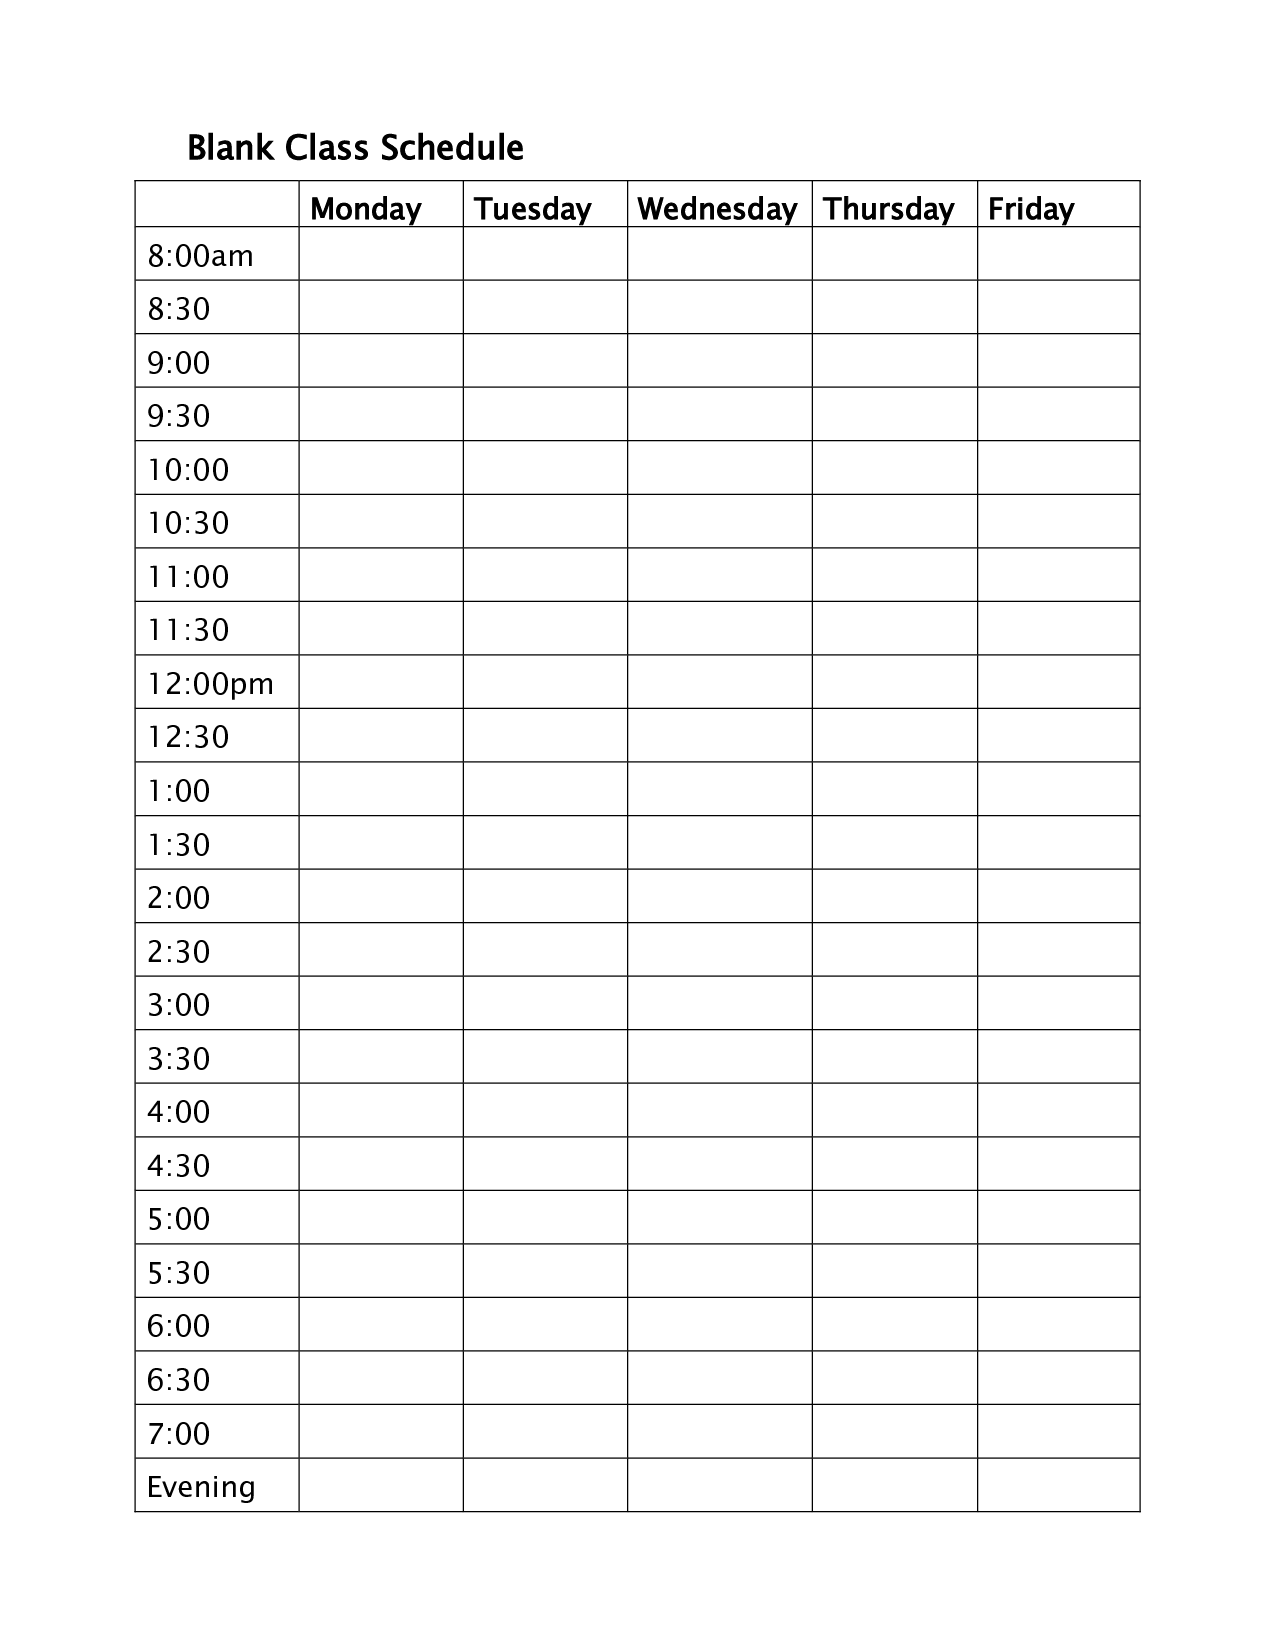 6-best-images-of-free-printable-blank-daily-schedule-free-printable-daily-schedule-daily